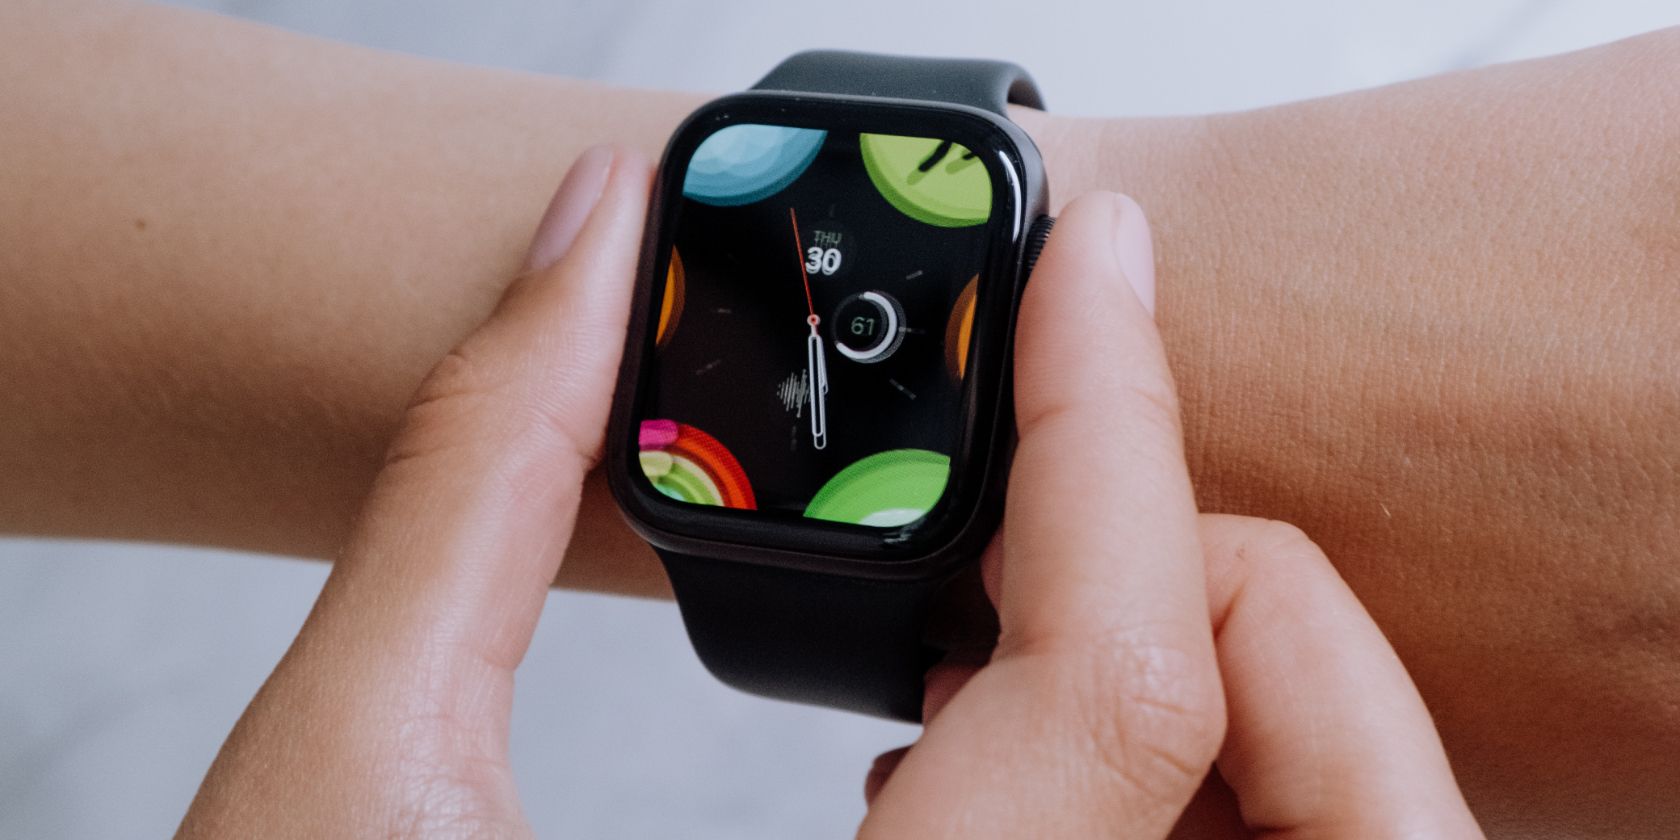 Apple Watch going to the app screen